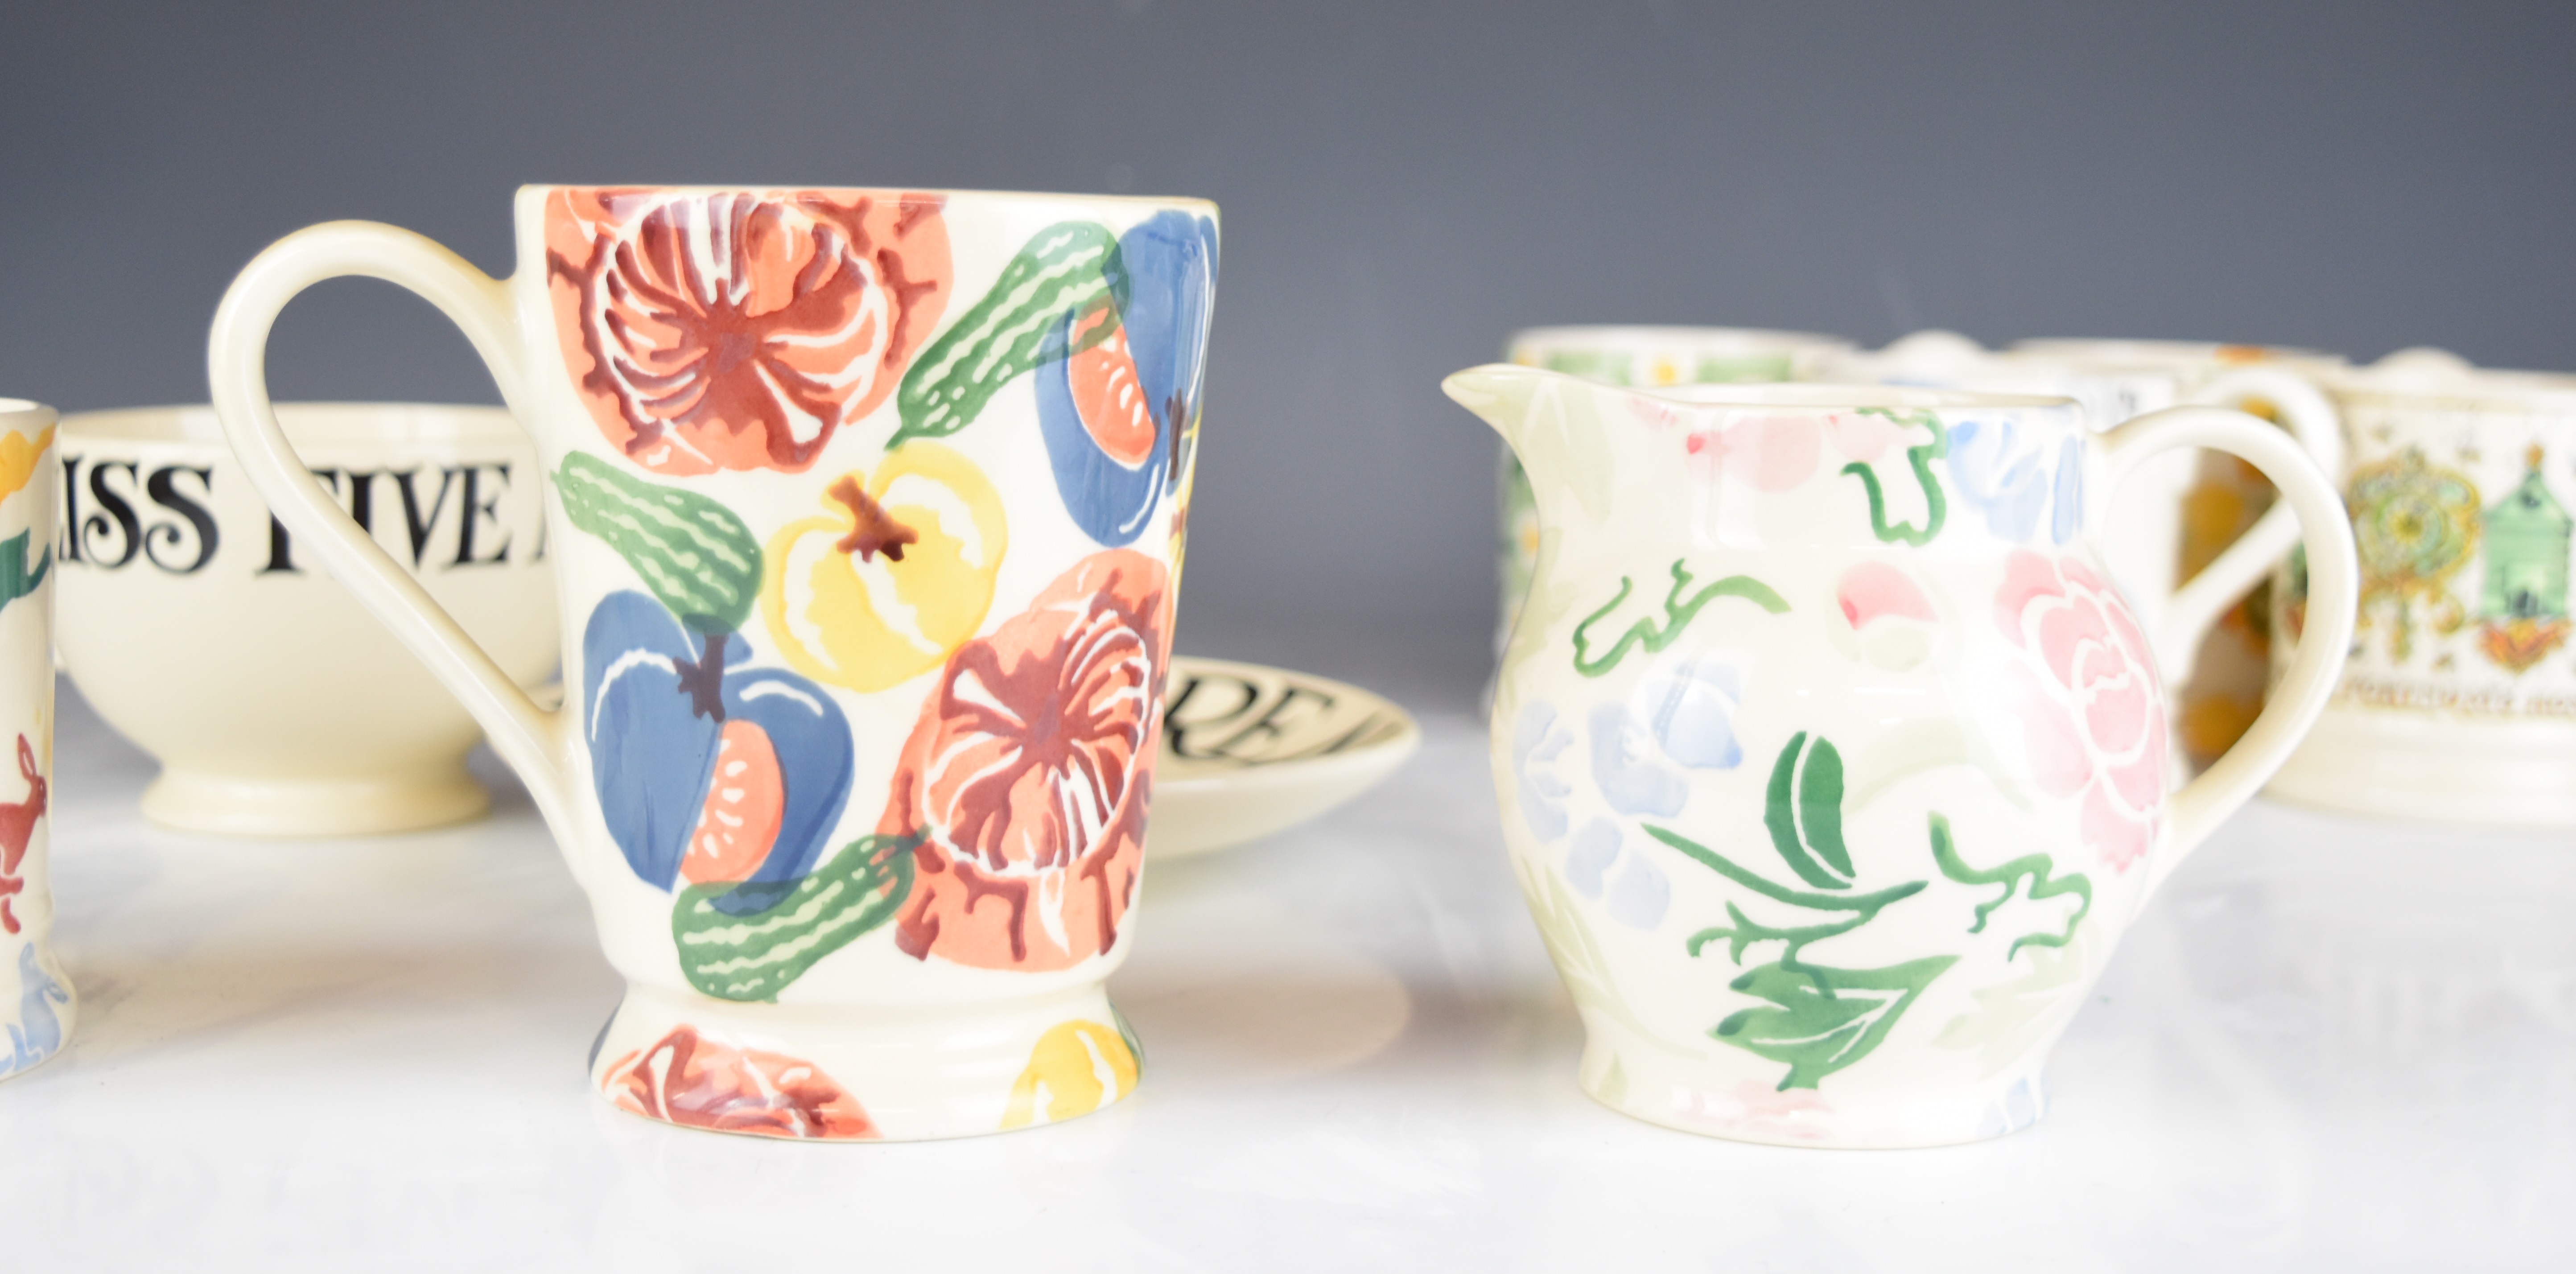 Emma Bridgewater ceramics including a tazza with pansy decoration, mugs, cups and saucers, glasses - Image 6 of 18